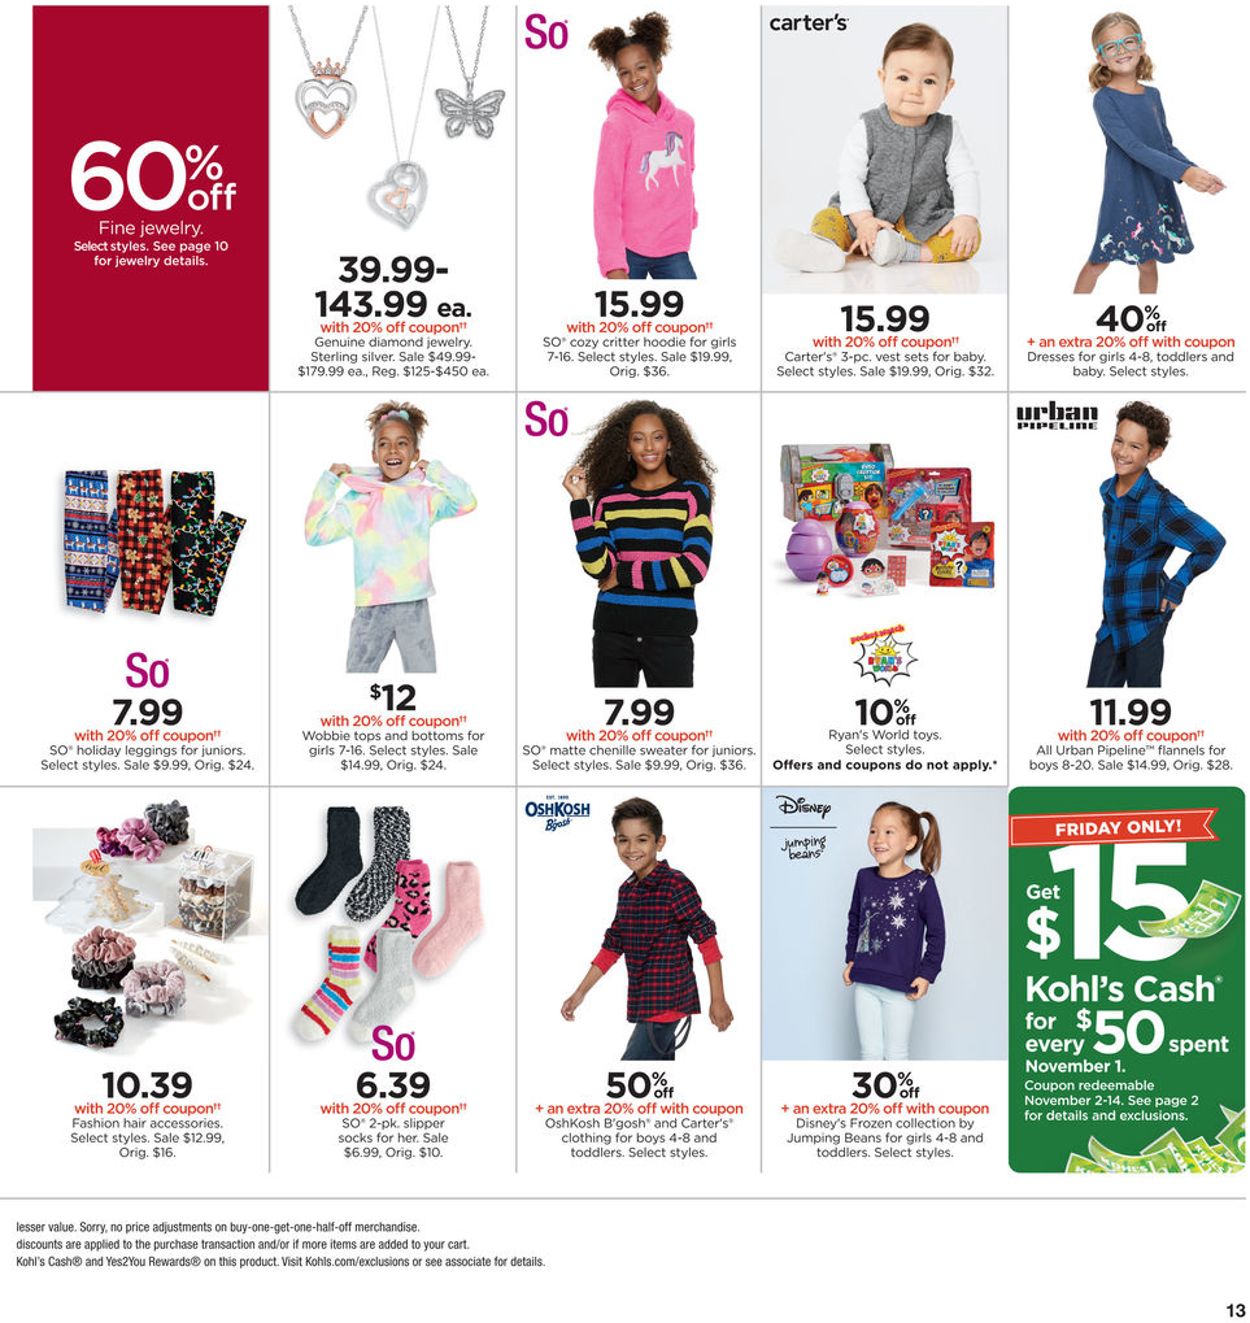 Kohl's Current weekly ad 11/01 - 11/03/2019 [13] - frequent-ads.com